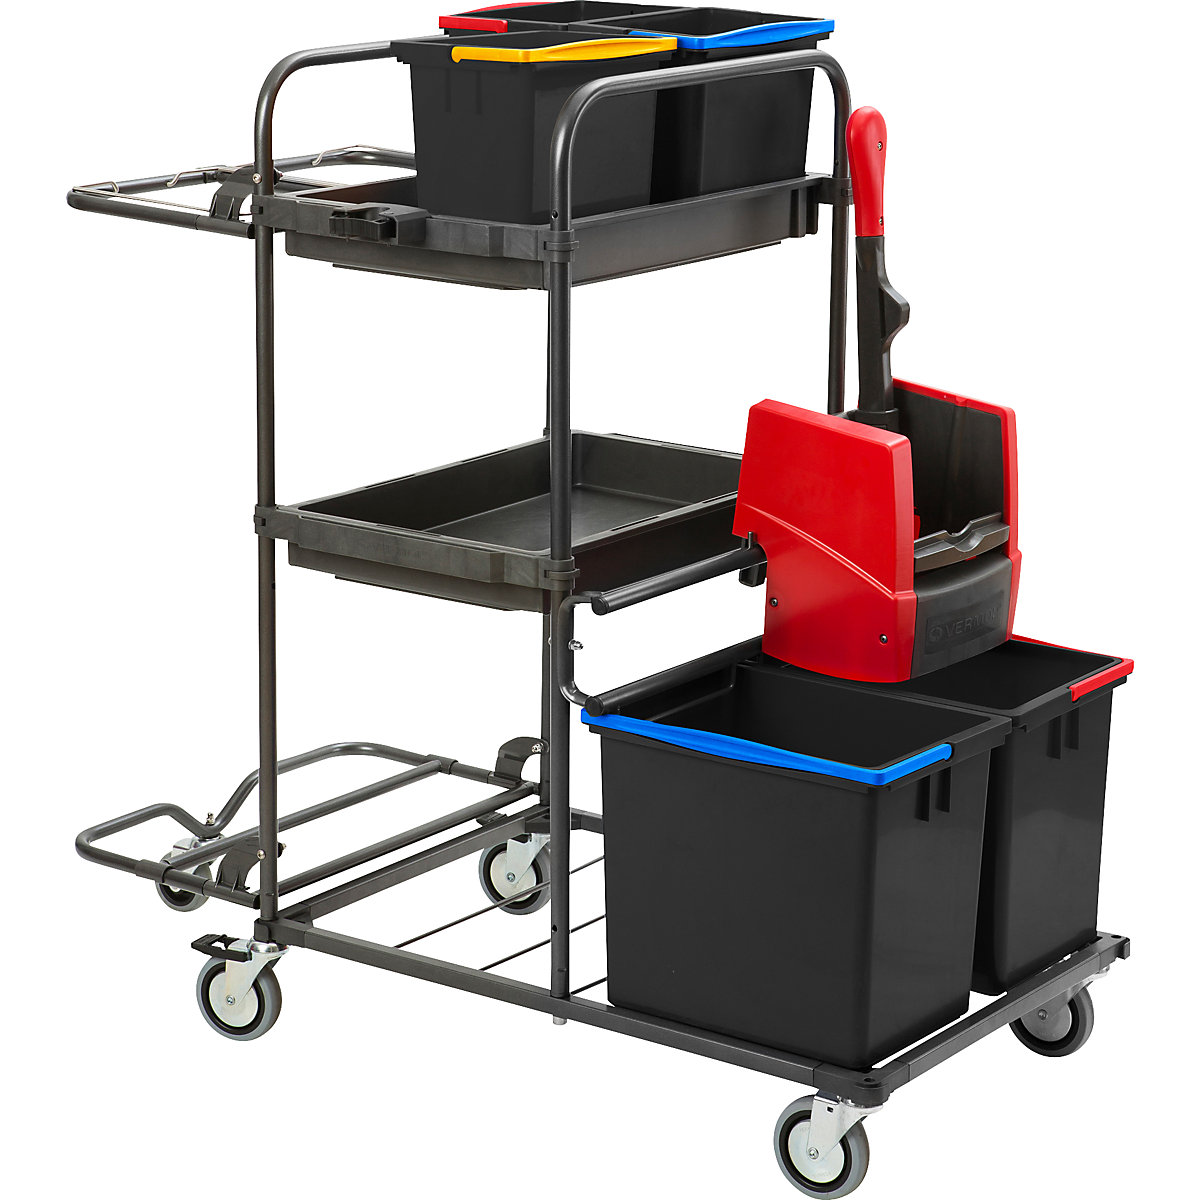 MISTRAL cleaning trolley - Vermop